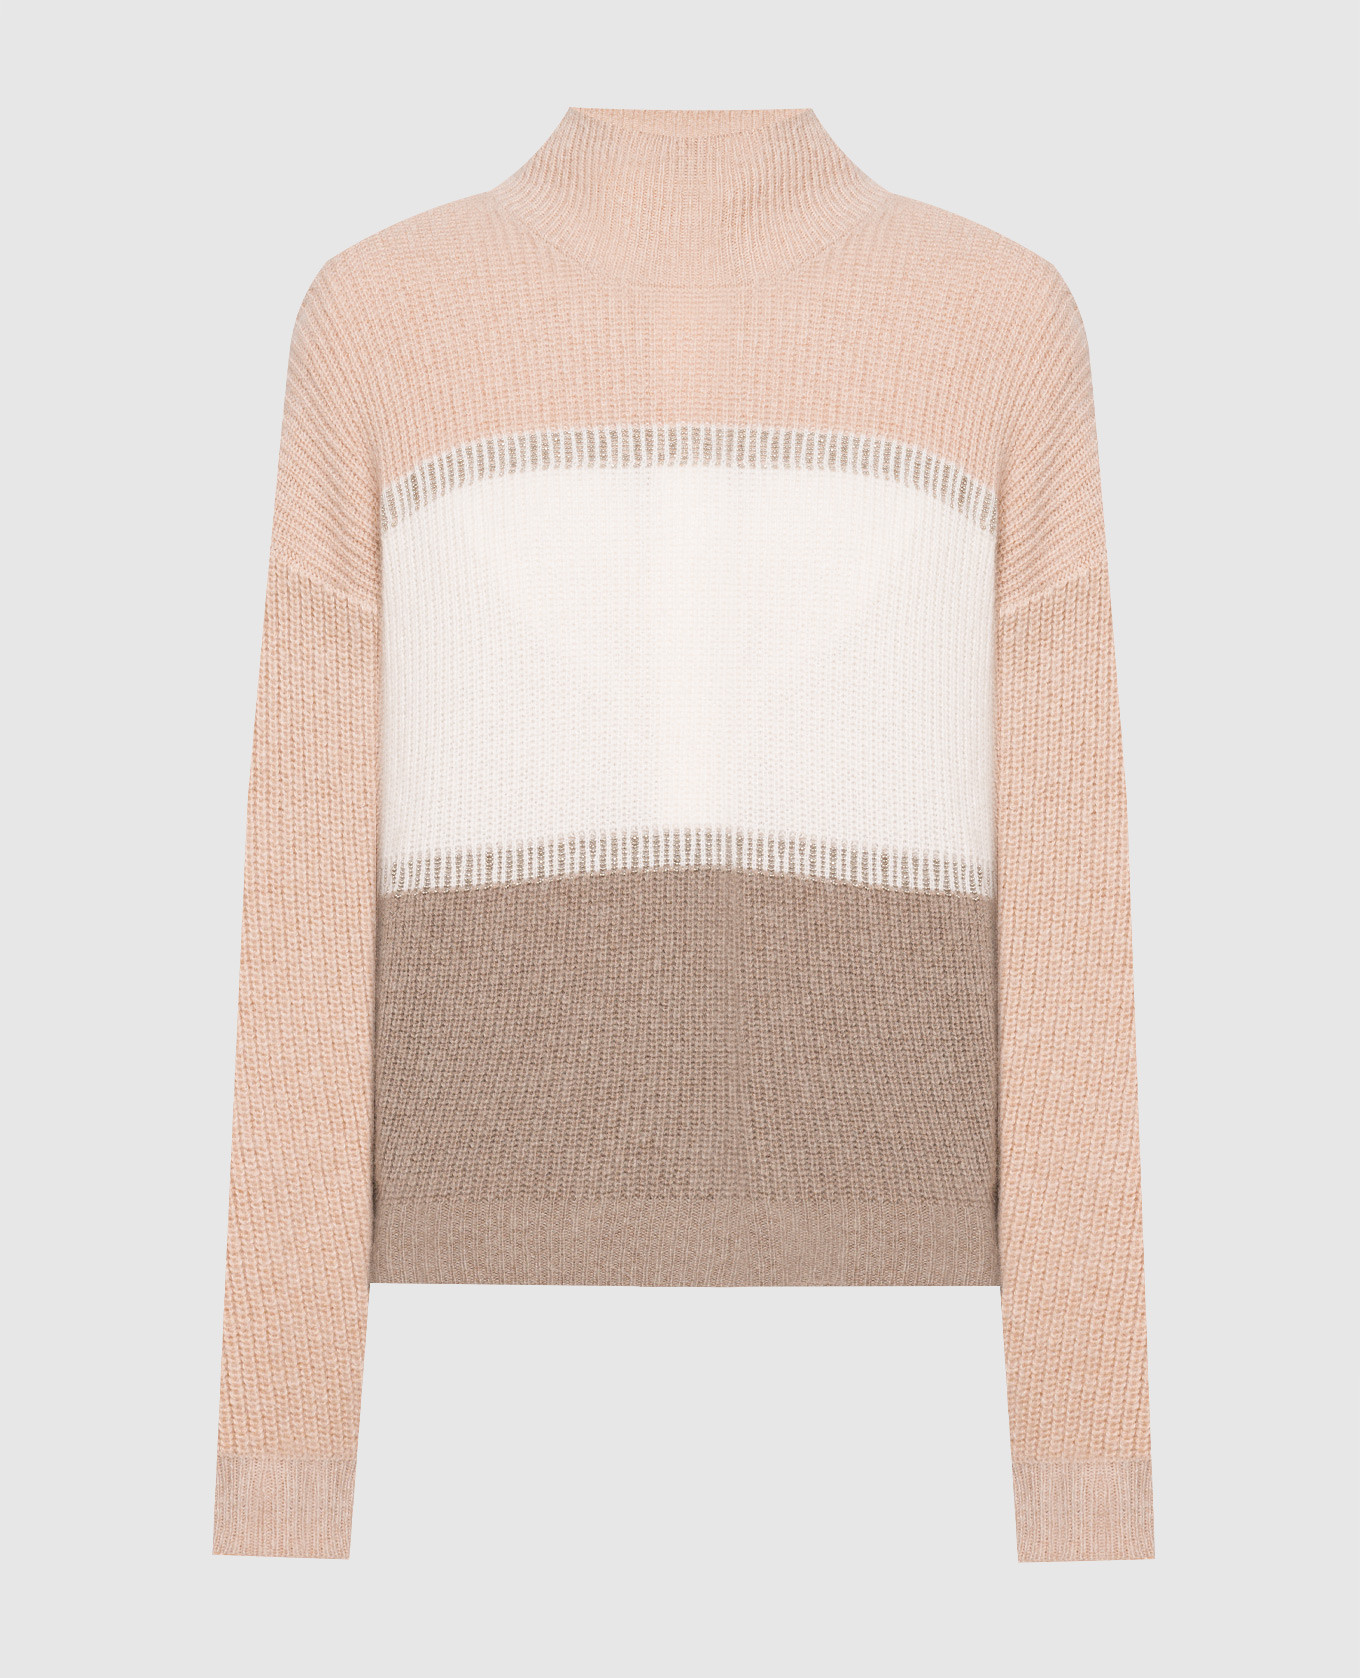 Beige wool, silk and cashmere sweater with monil chain